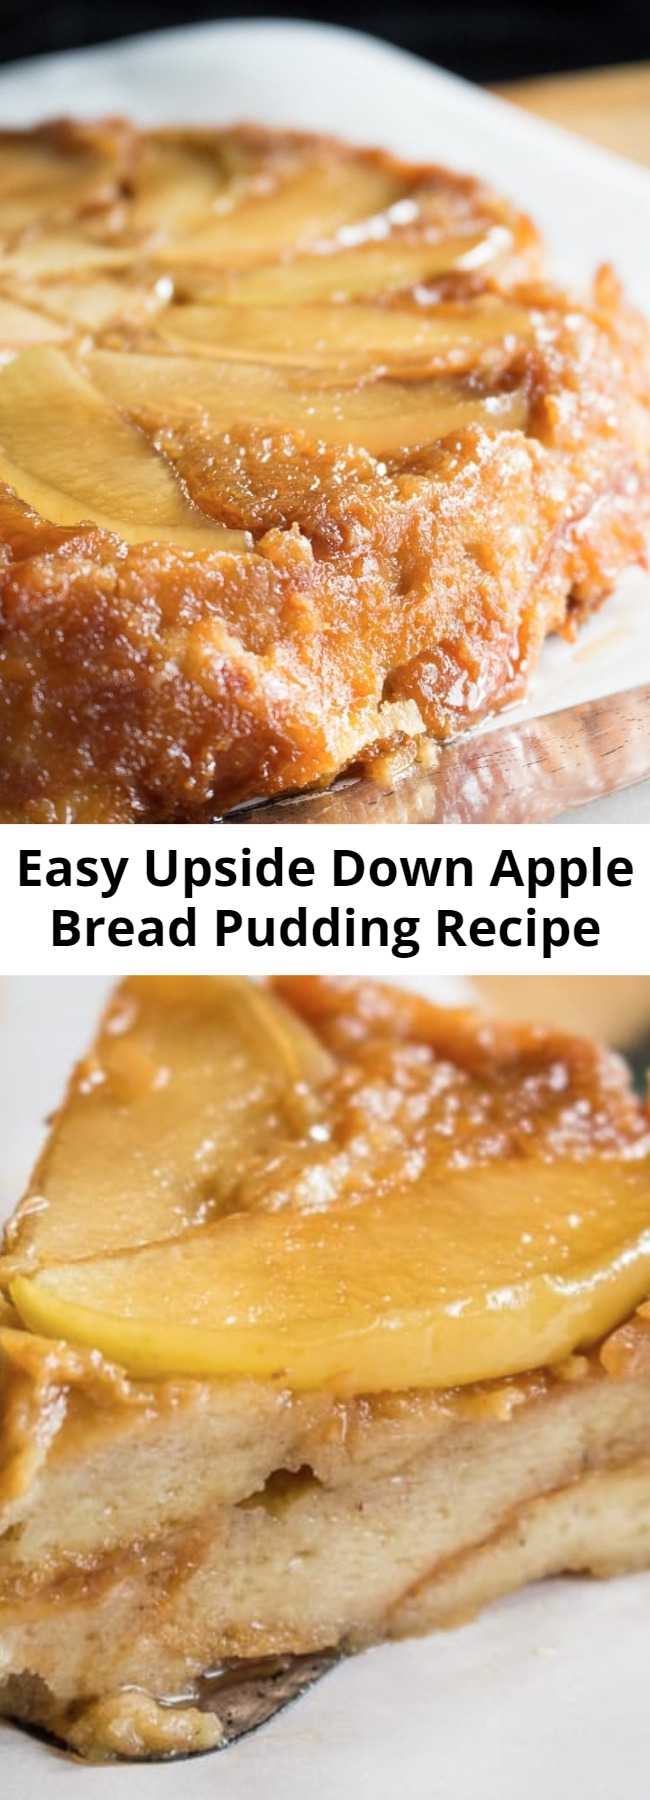 Easy Upside Down Apple Bread Pudding Recipe - Apple bread pudding has gone upside down!  You'll love this awesome and easy bread pudding recipe.  Try not to eat it all at one sitting. #apple #applepie #thanksgiving #breadpudding #dessert